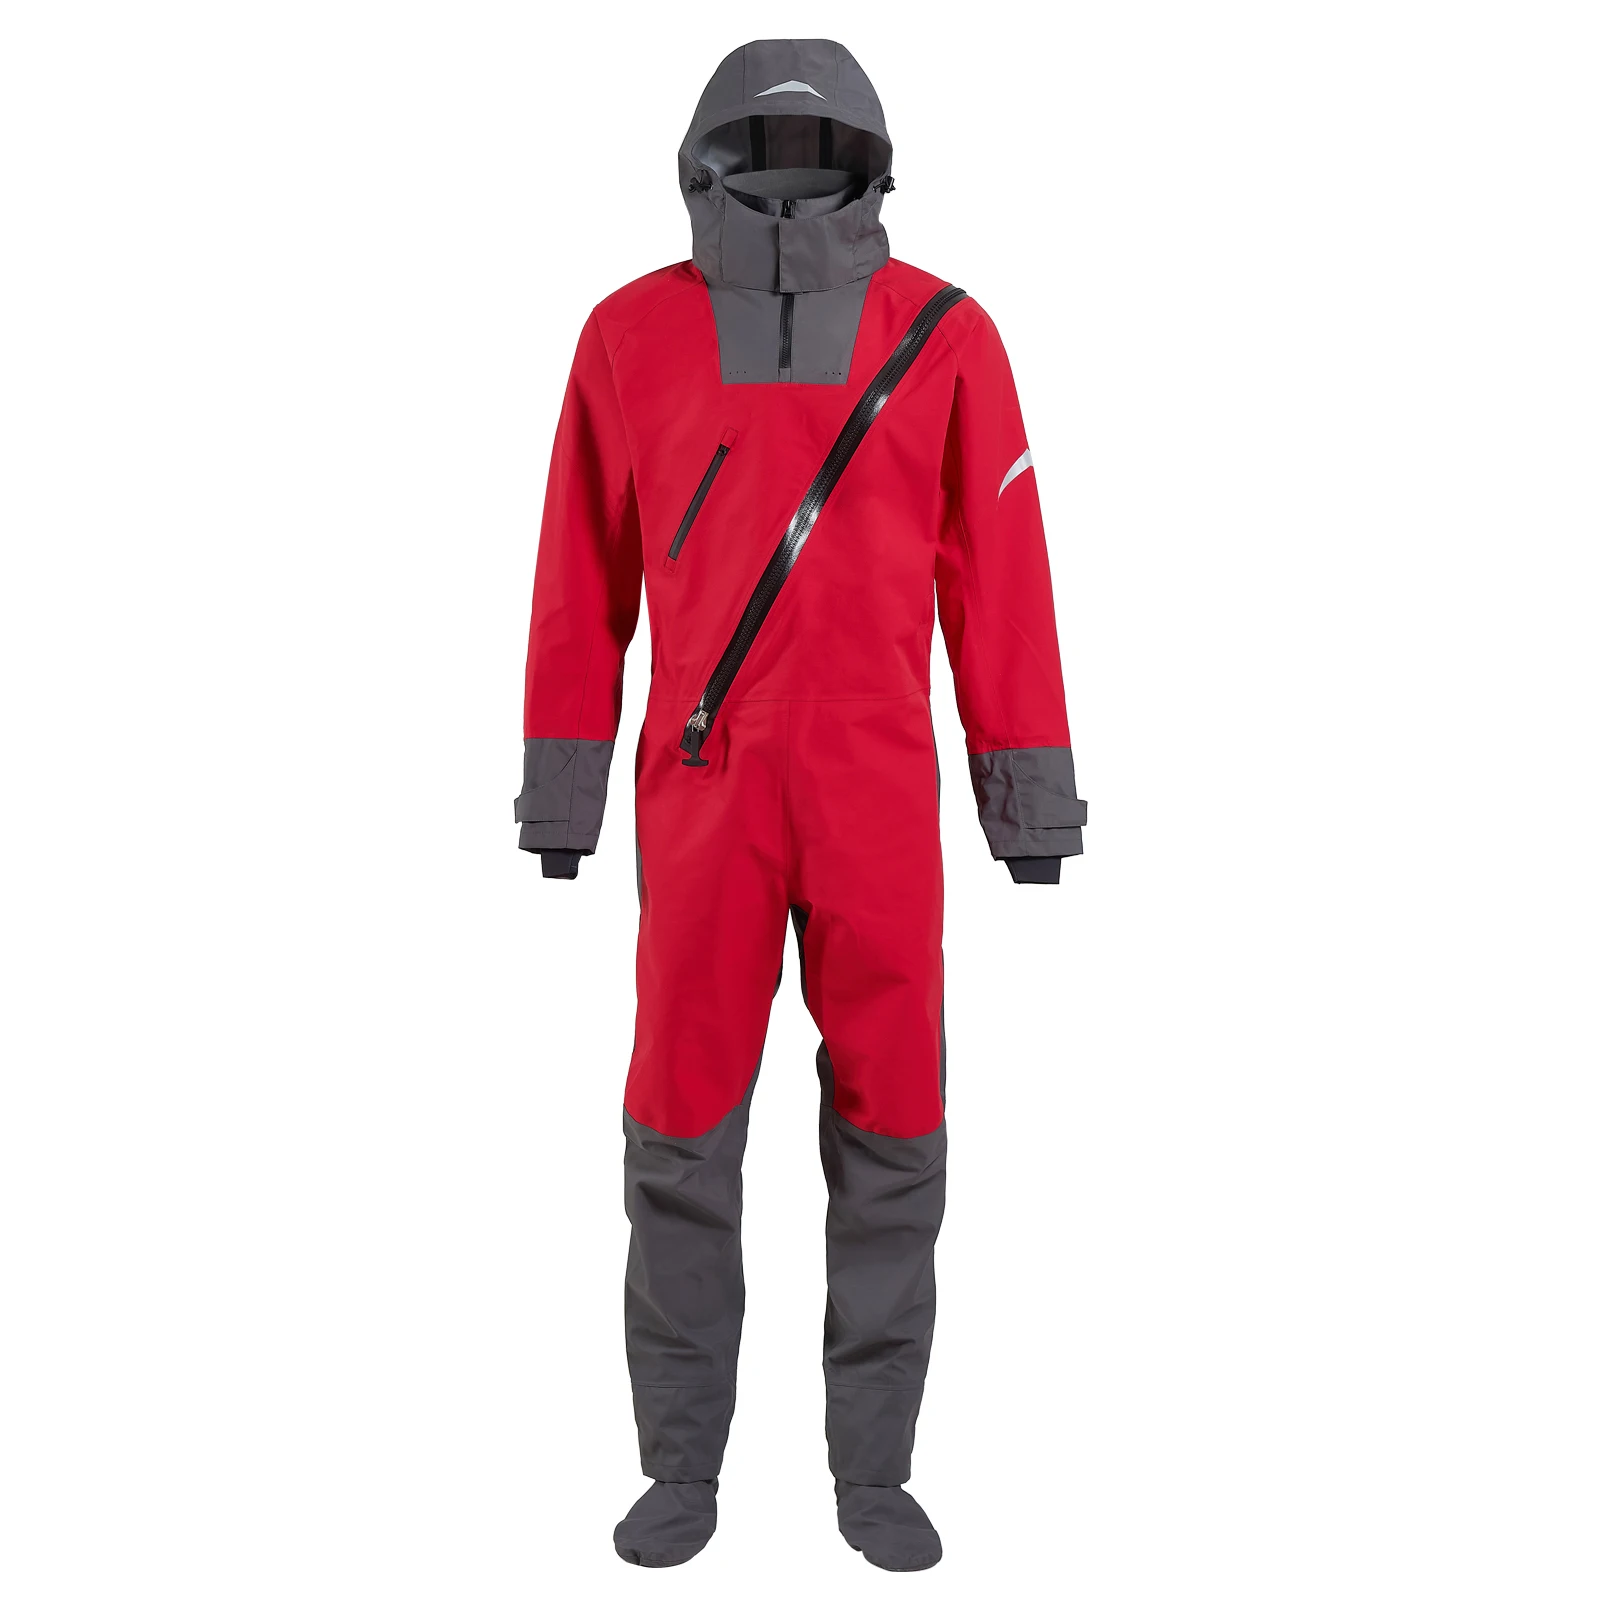 Men's Drysuits For Kayak  Use Kayaking Surfing Stand Up Paddle Three Layers Of Waterproof Material One Piece Cap Suits DM5312